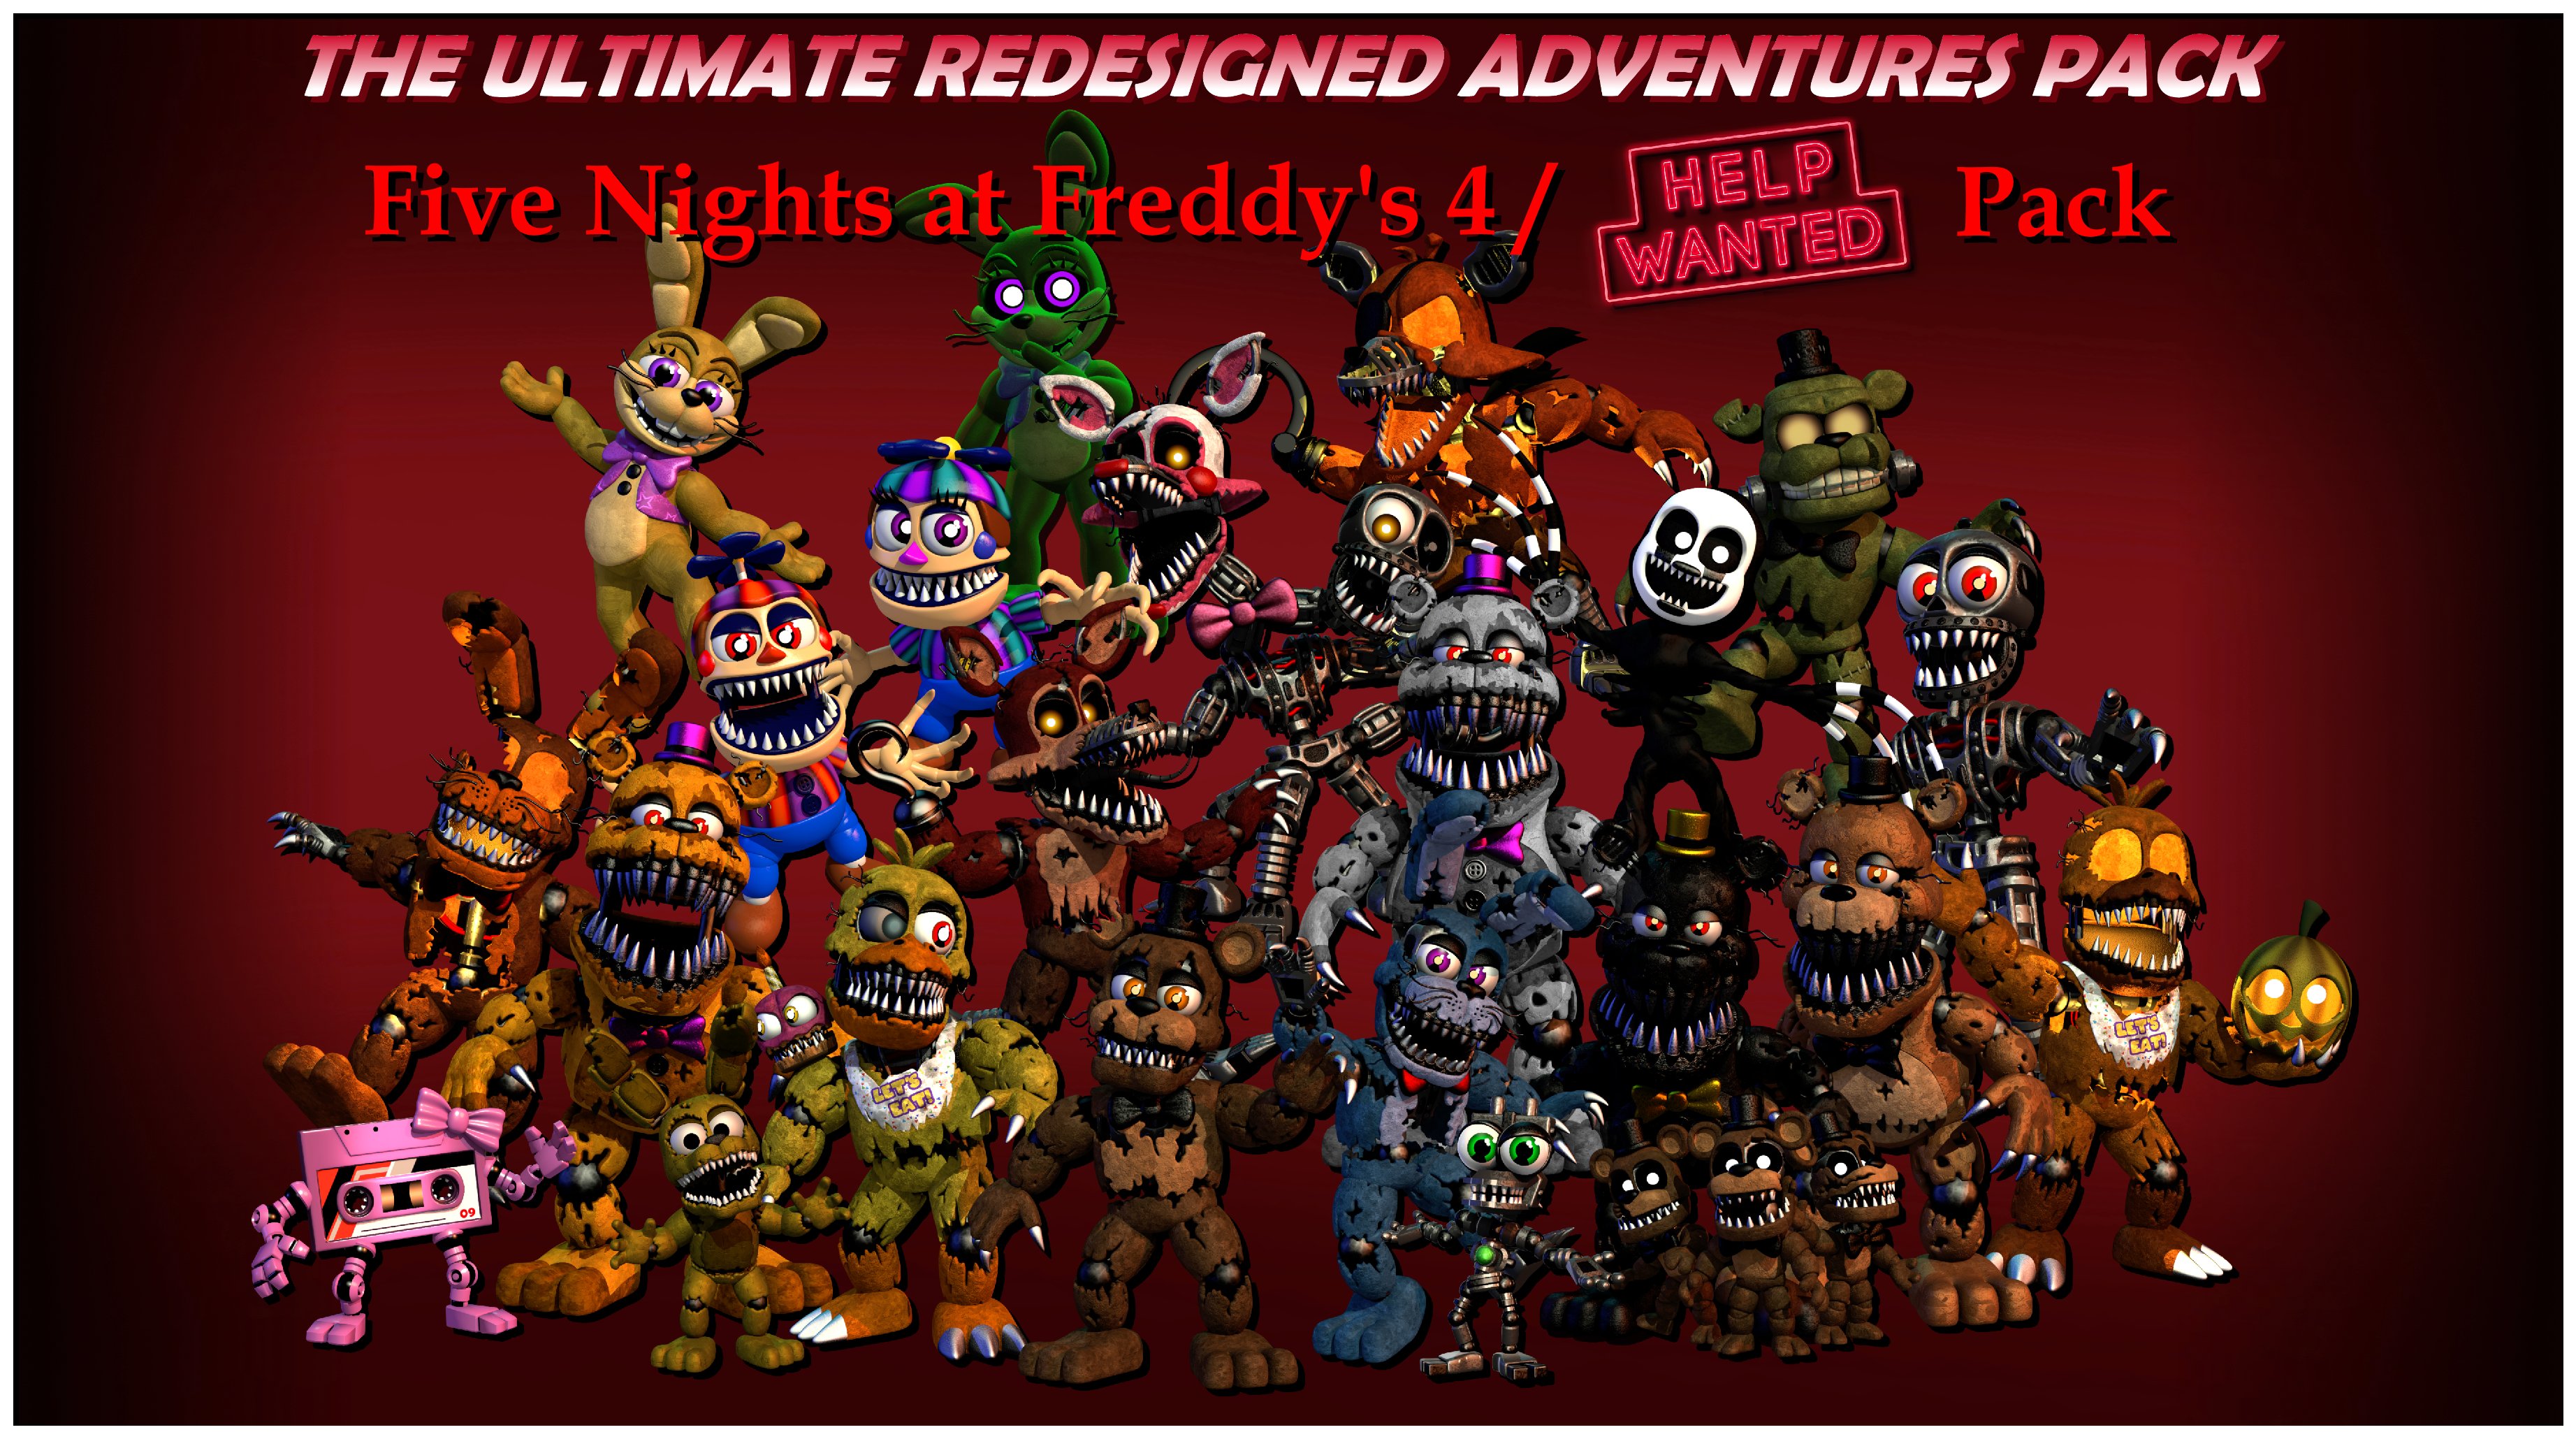 detaljeret Alabama excentrisk Ultimate Redesigned Adventures Pack on Twitter: "Blender 2.79 release of  the URAP Five Nights at Freddy's 4 / Help Wanted Pack! Download it on  Deviantart now! https://t.co/XQPXUiTb9J https://t.co/xlh1eSsoDW" / Twitter